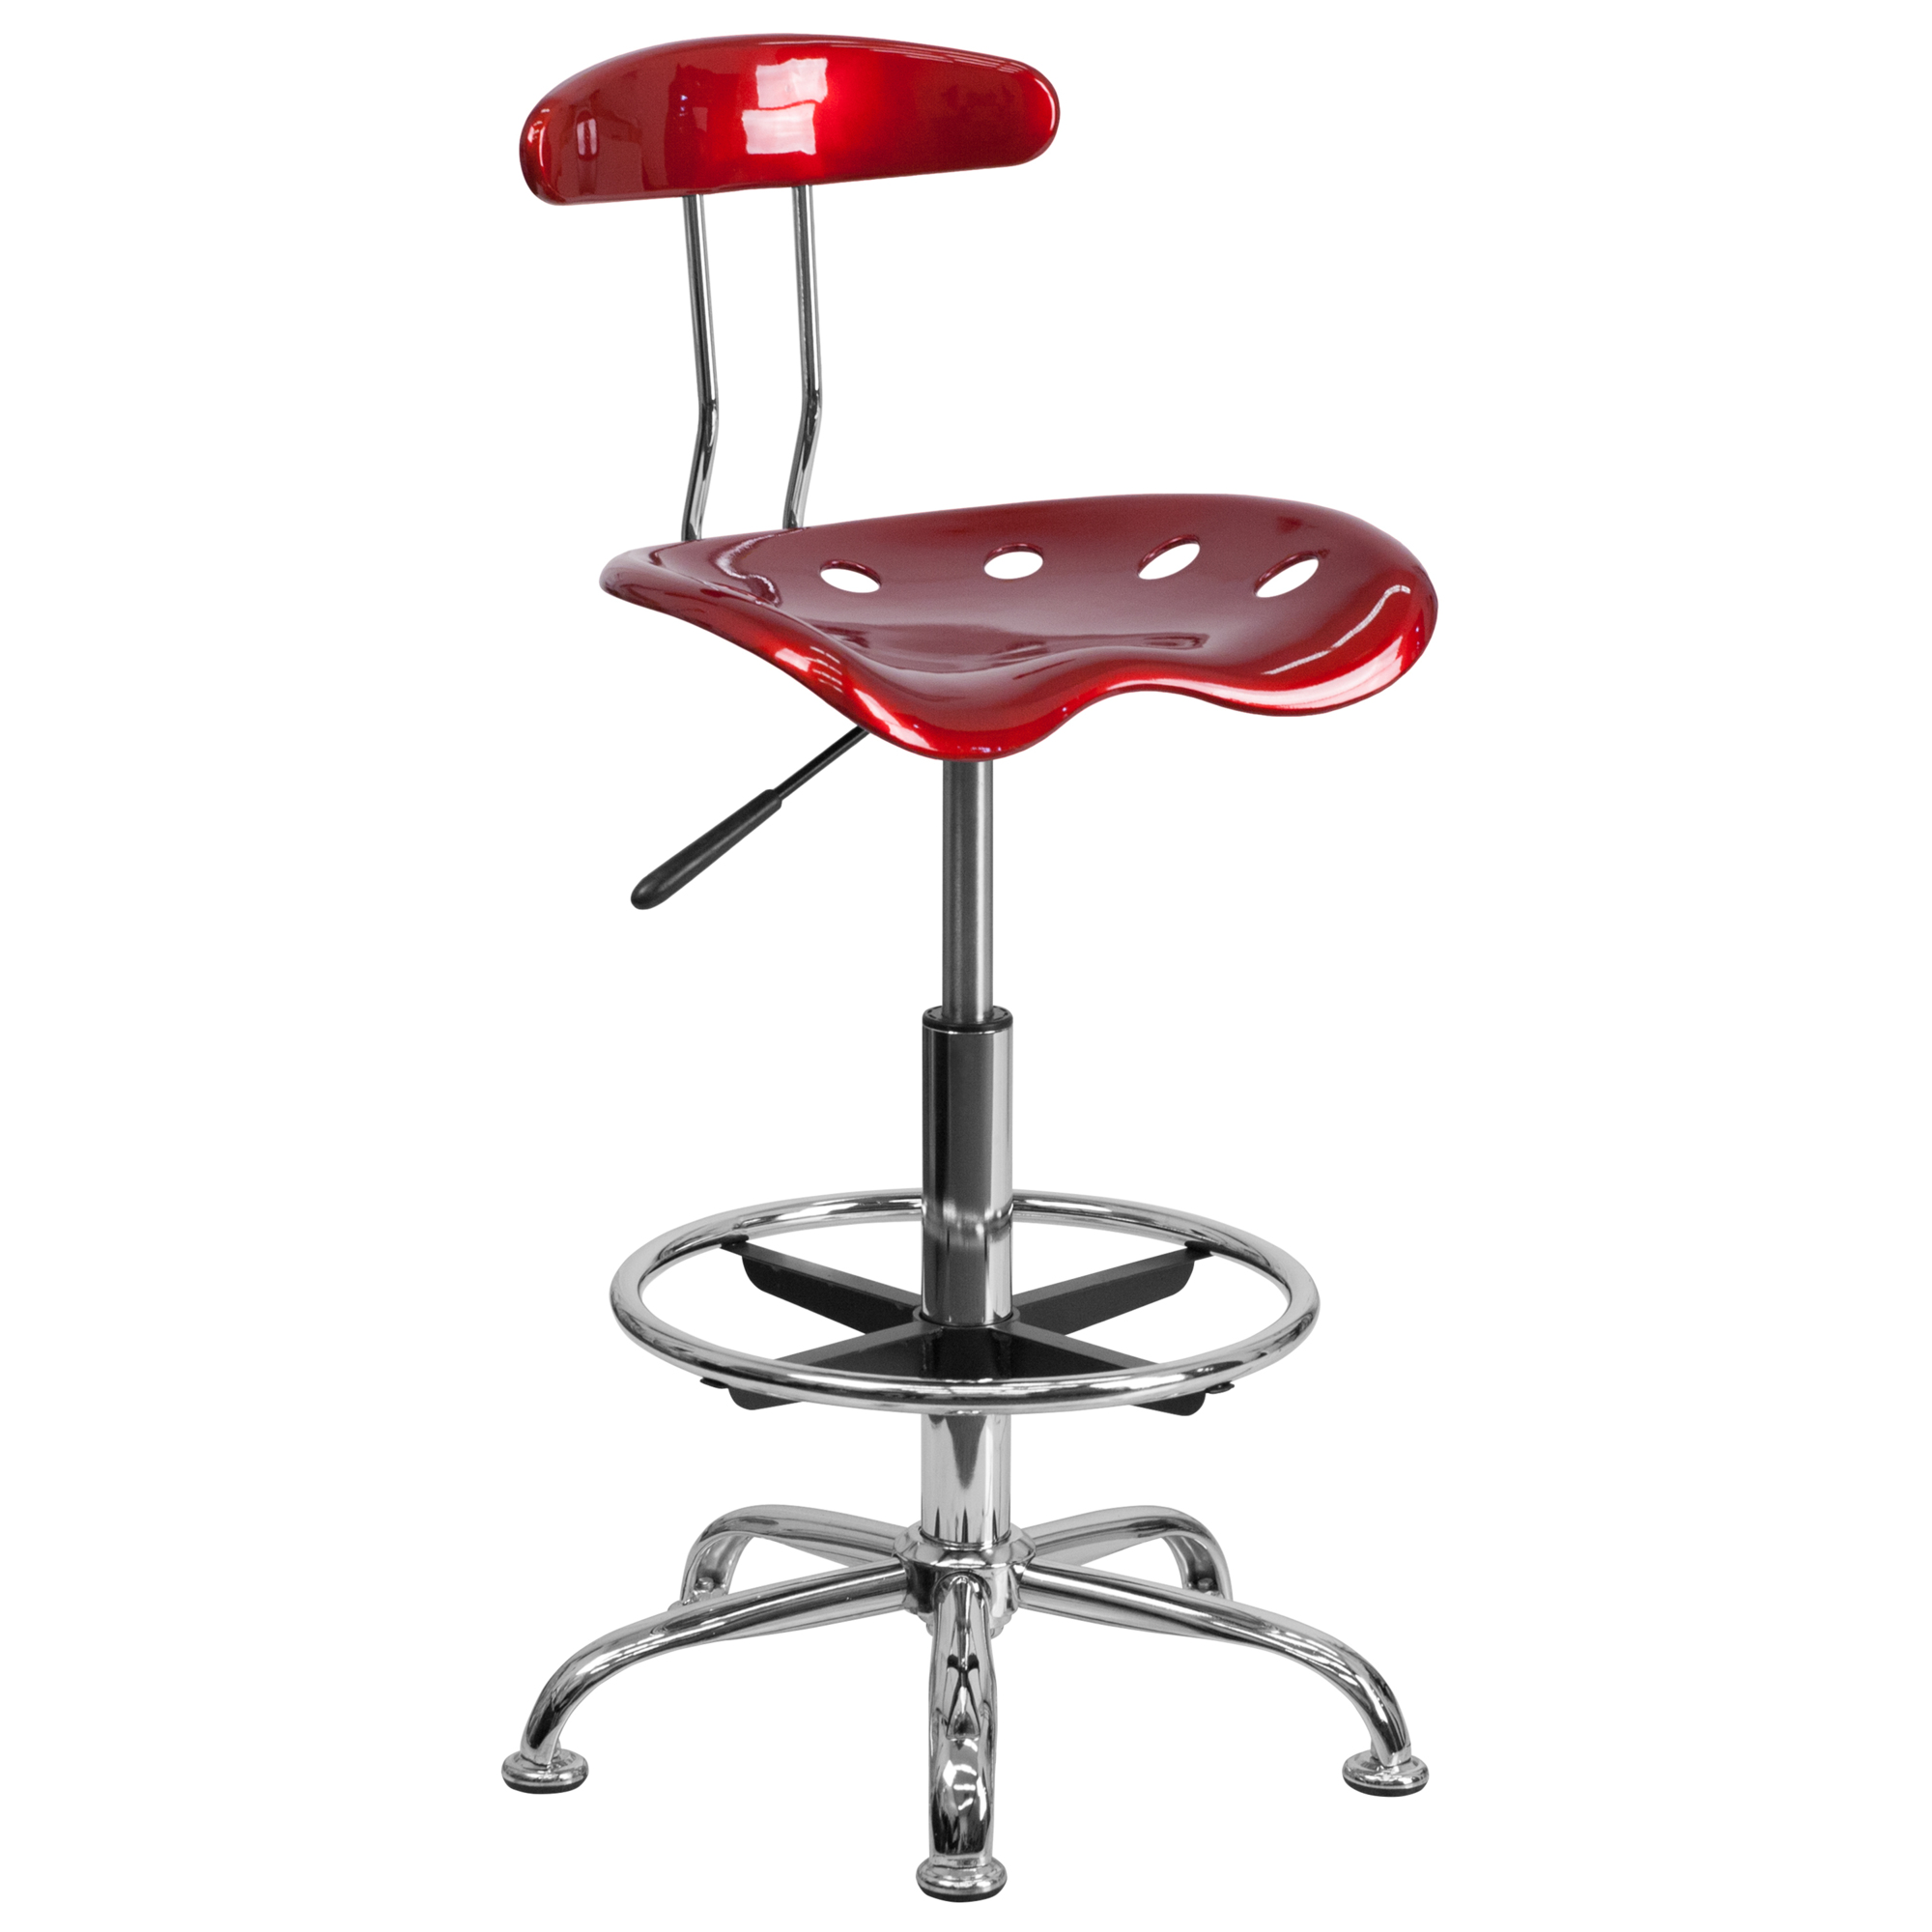 Flash Furniture, Vibrant Wine Red and Chrome Drafting Stool, Primary Color Red, Included (qty.) 1, Model LF215WNRED